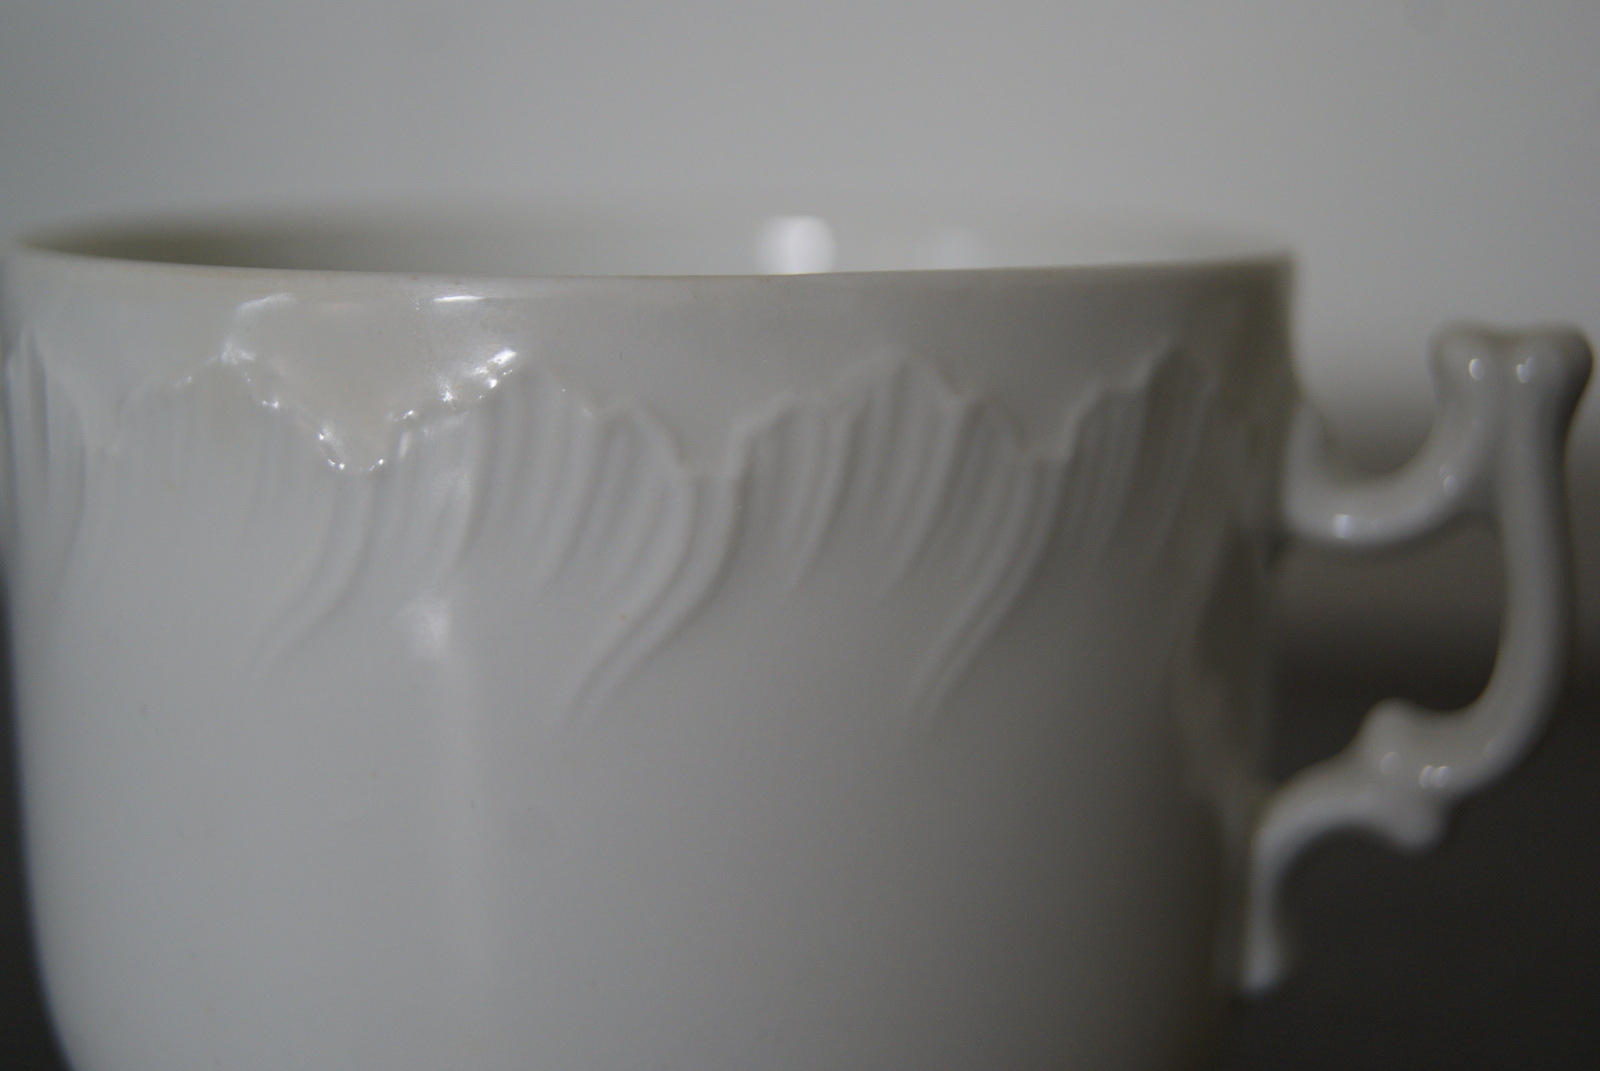 Porsgrund cup with saucer white with relief